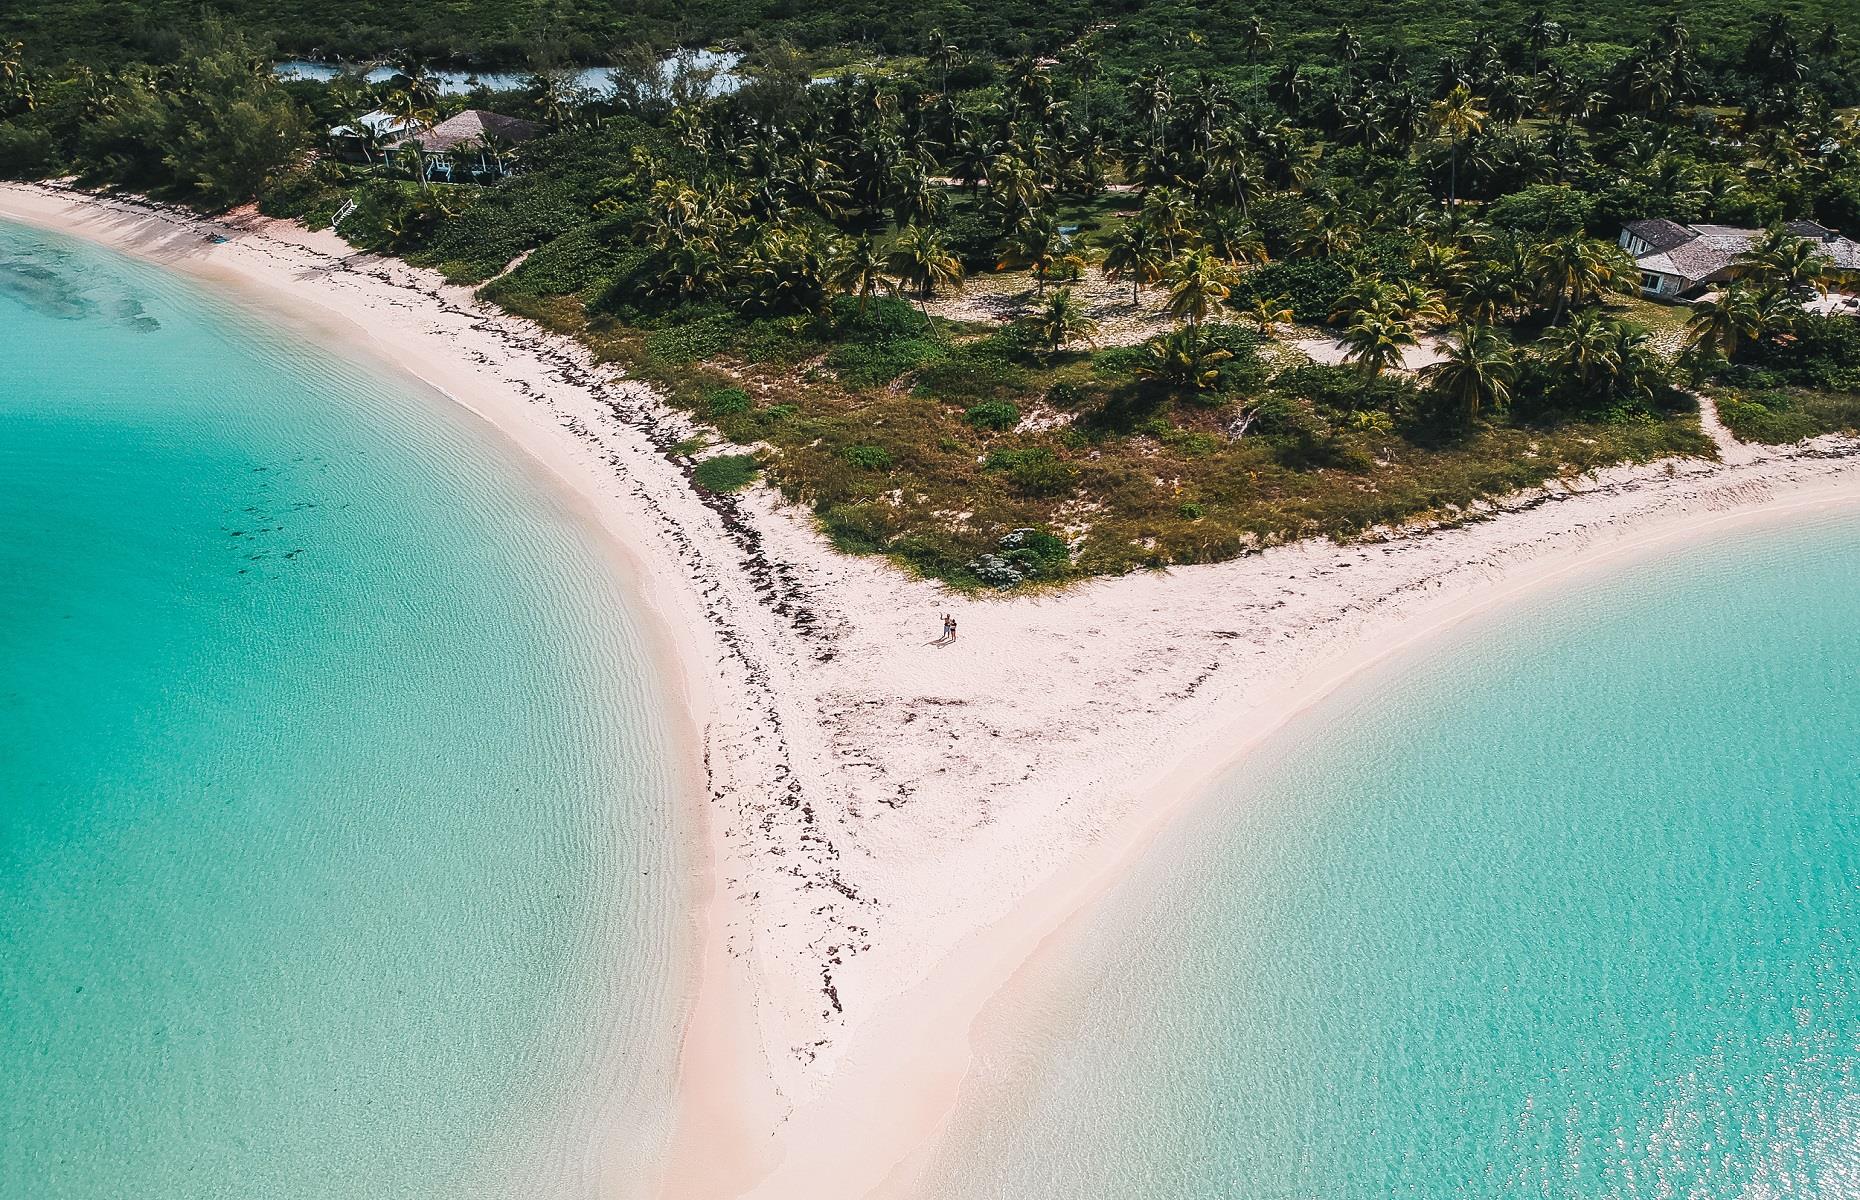 <p>Both islands have dreamy stretches of sand, in the form of Twin Coves Beach on Eleuthera and Pink Sand Beach on Harbour Island. The latter was even named the second-best beach in the world by <a href="https://www.forbes.com/sites/duncanmadden/2019/09/19/ranked-the-top-ten-best-beaches-in-the-world/?sh=1904c68f5a4b">Alpha Travel Insurance</a> in 2019. Looking at a range of factors, including visitor ratings, average water temperatures and average number of sunny days, the company declared Pink Sand Beach a must-visit.</p>